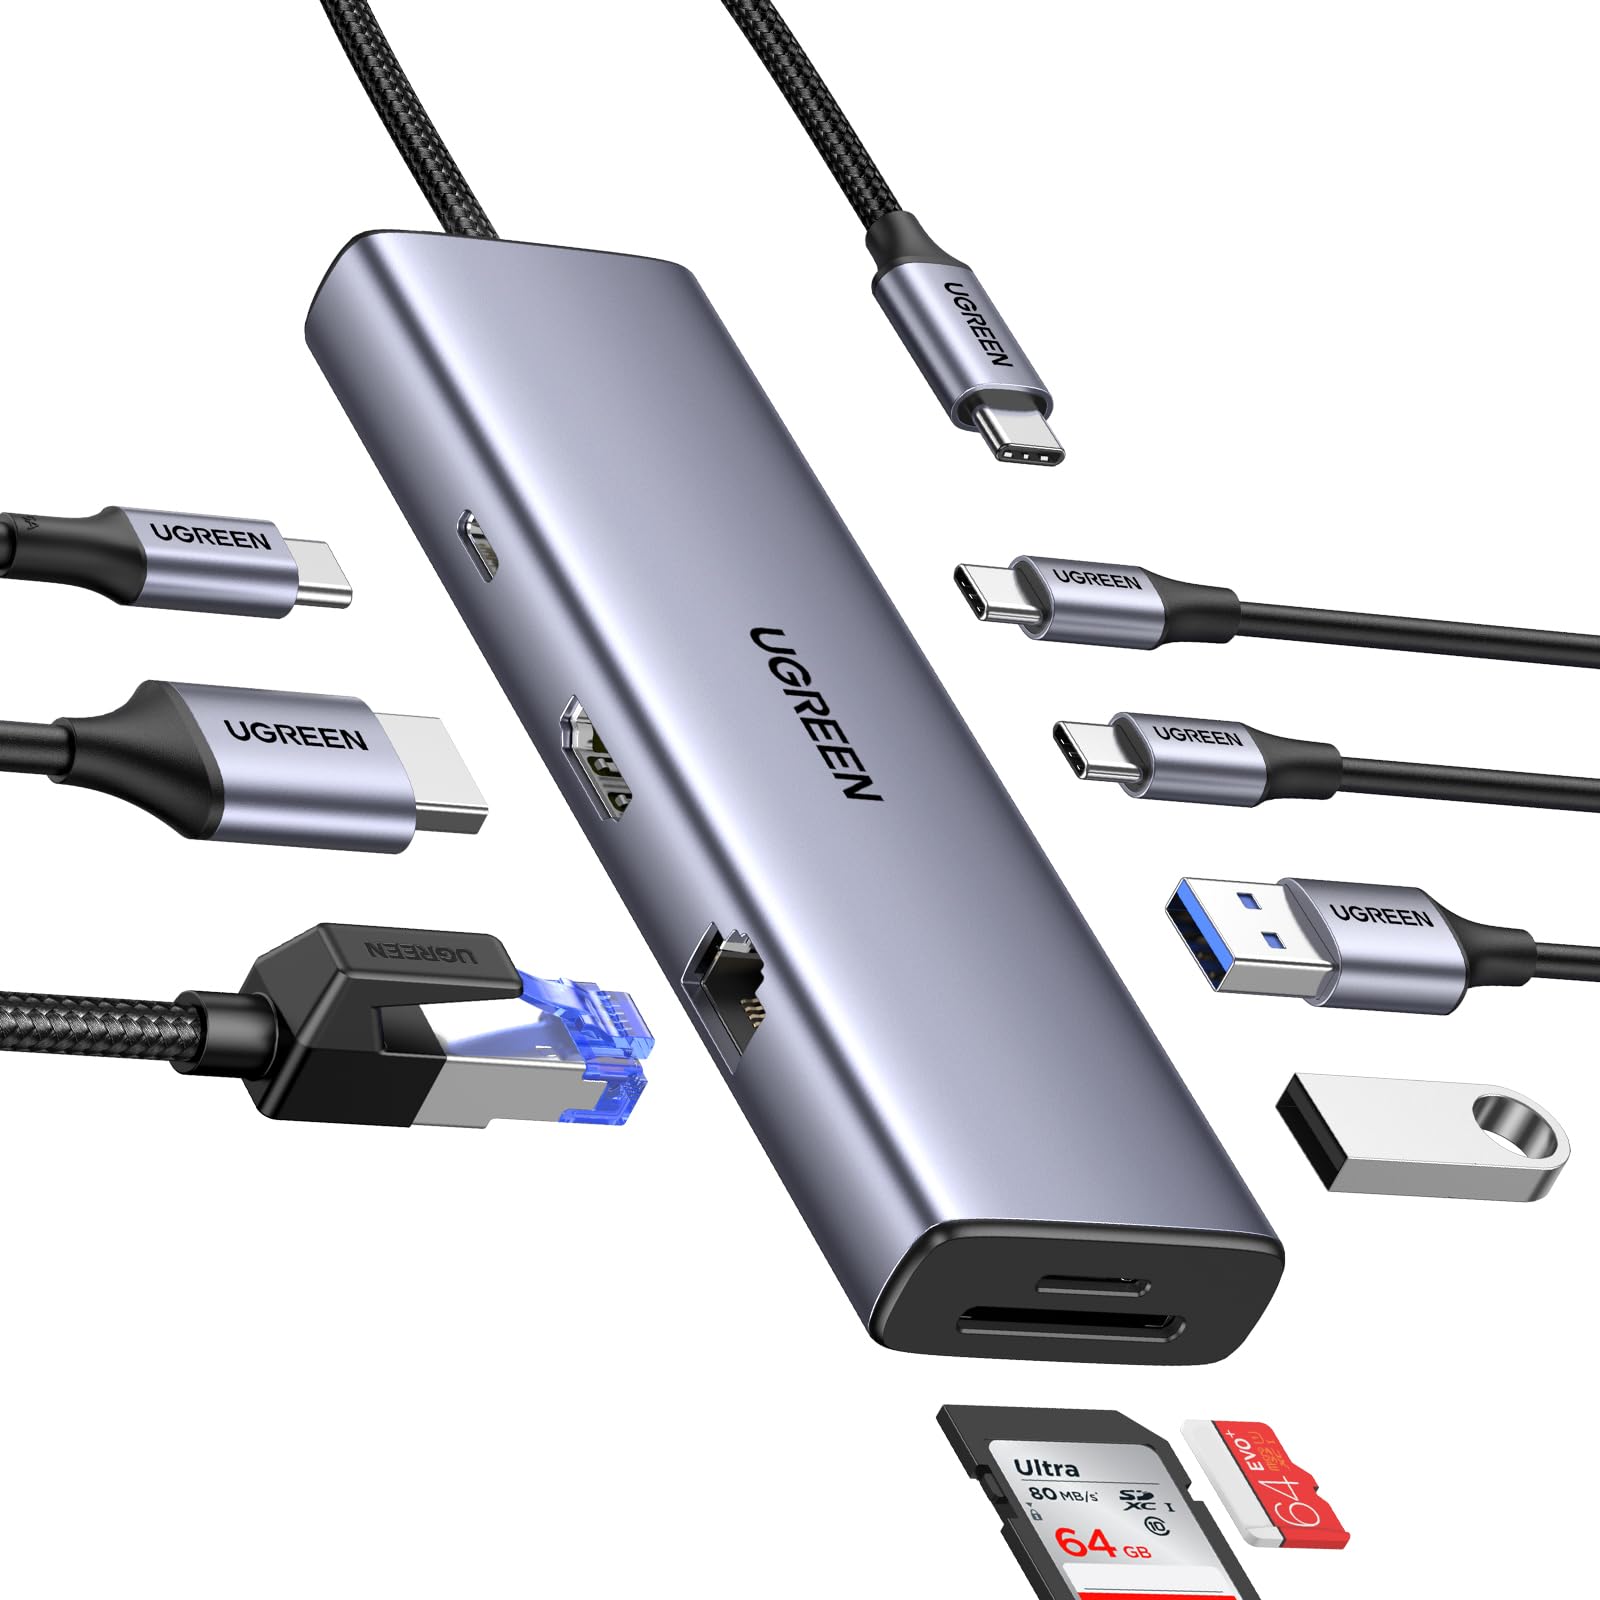 UGREEN Revodok USB C Hub 9-in-1, USB C Dock with 4K@60Hz HDMI, 5 Gbps USBC and USBA Data Ports, 1Gbps Ethernet, 100W PD, SD/TF Card Reader, Docking Station for MacBook Air/Pro, iPad, Dell XP and More